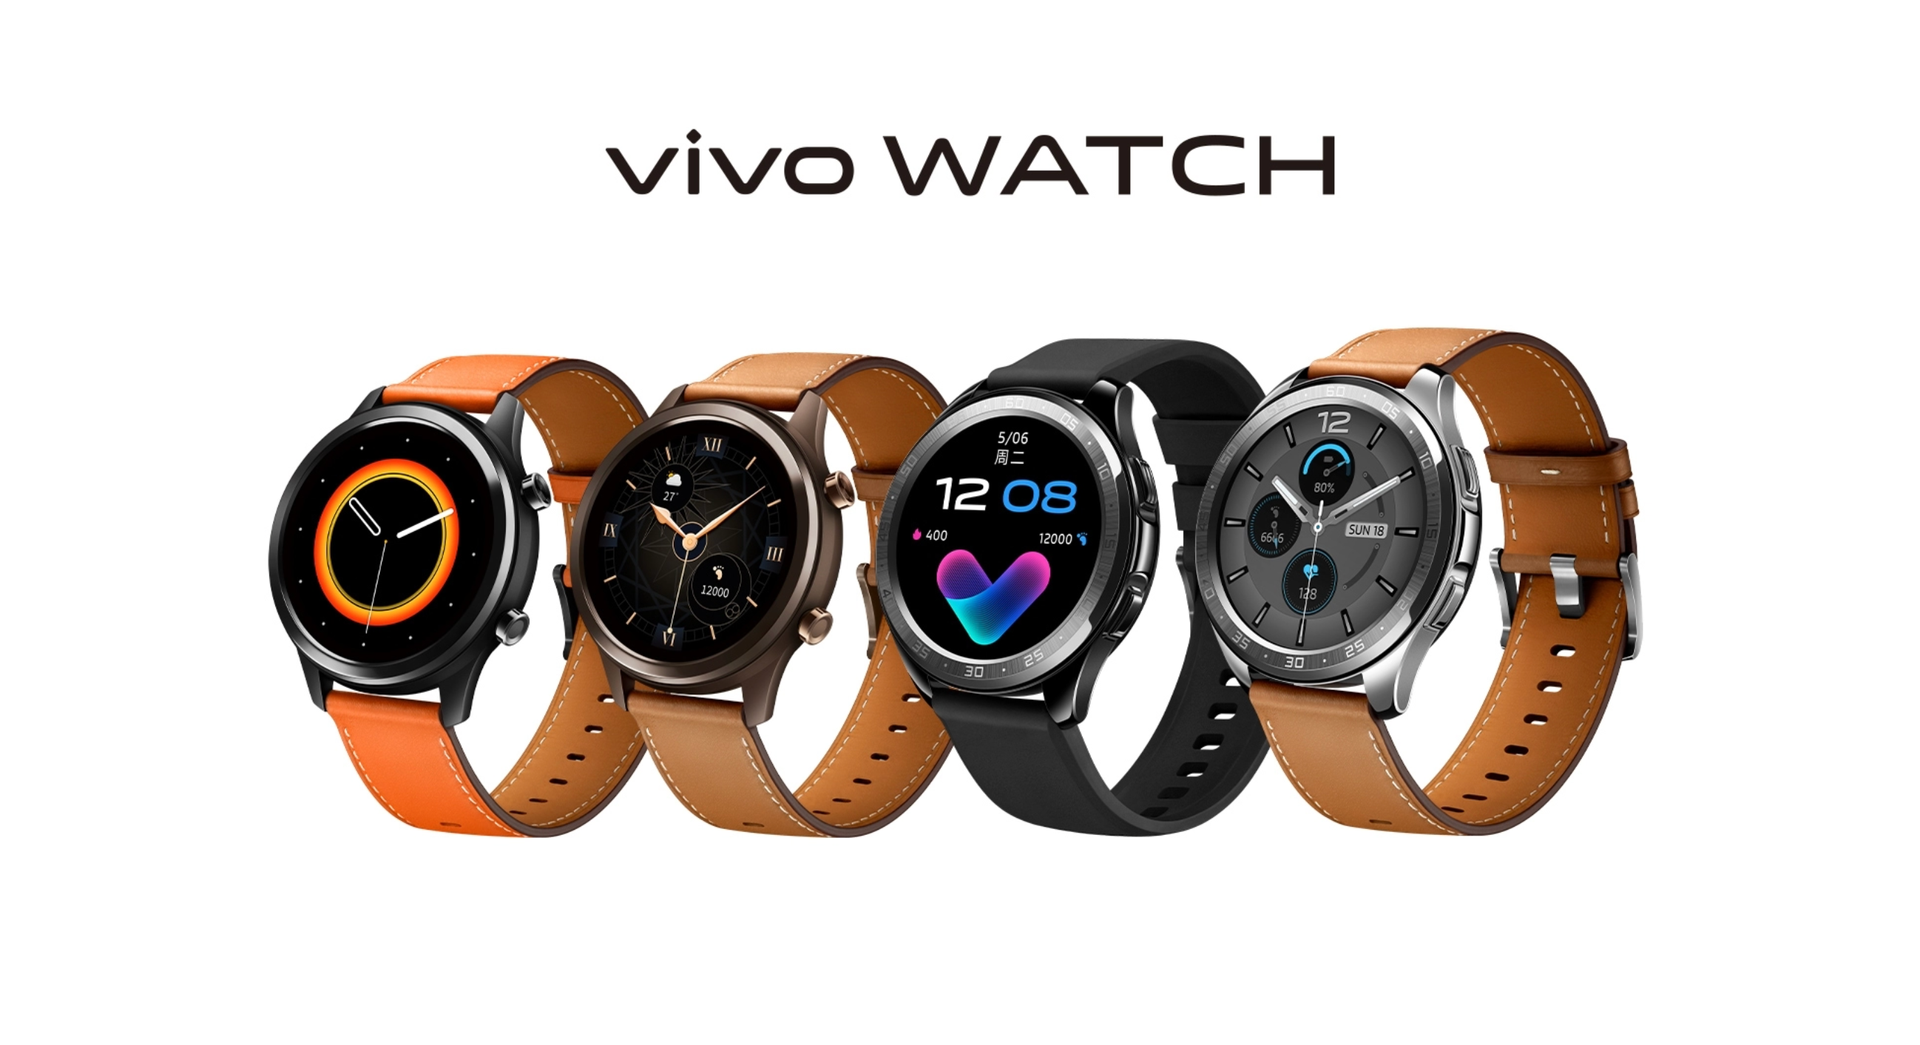 New Vivo Watch with eSIM and Bluetooth 5.1 ready to be announced